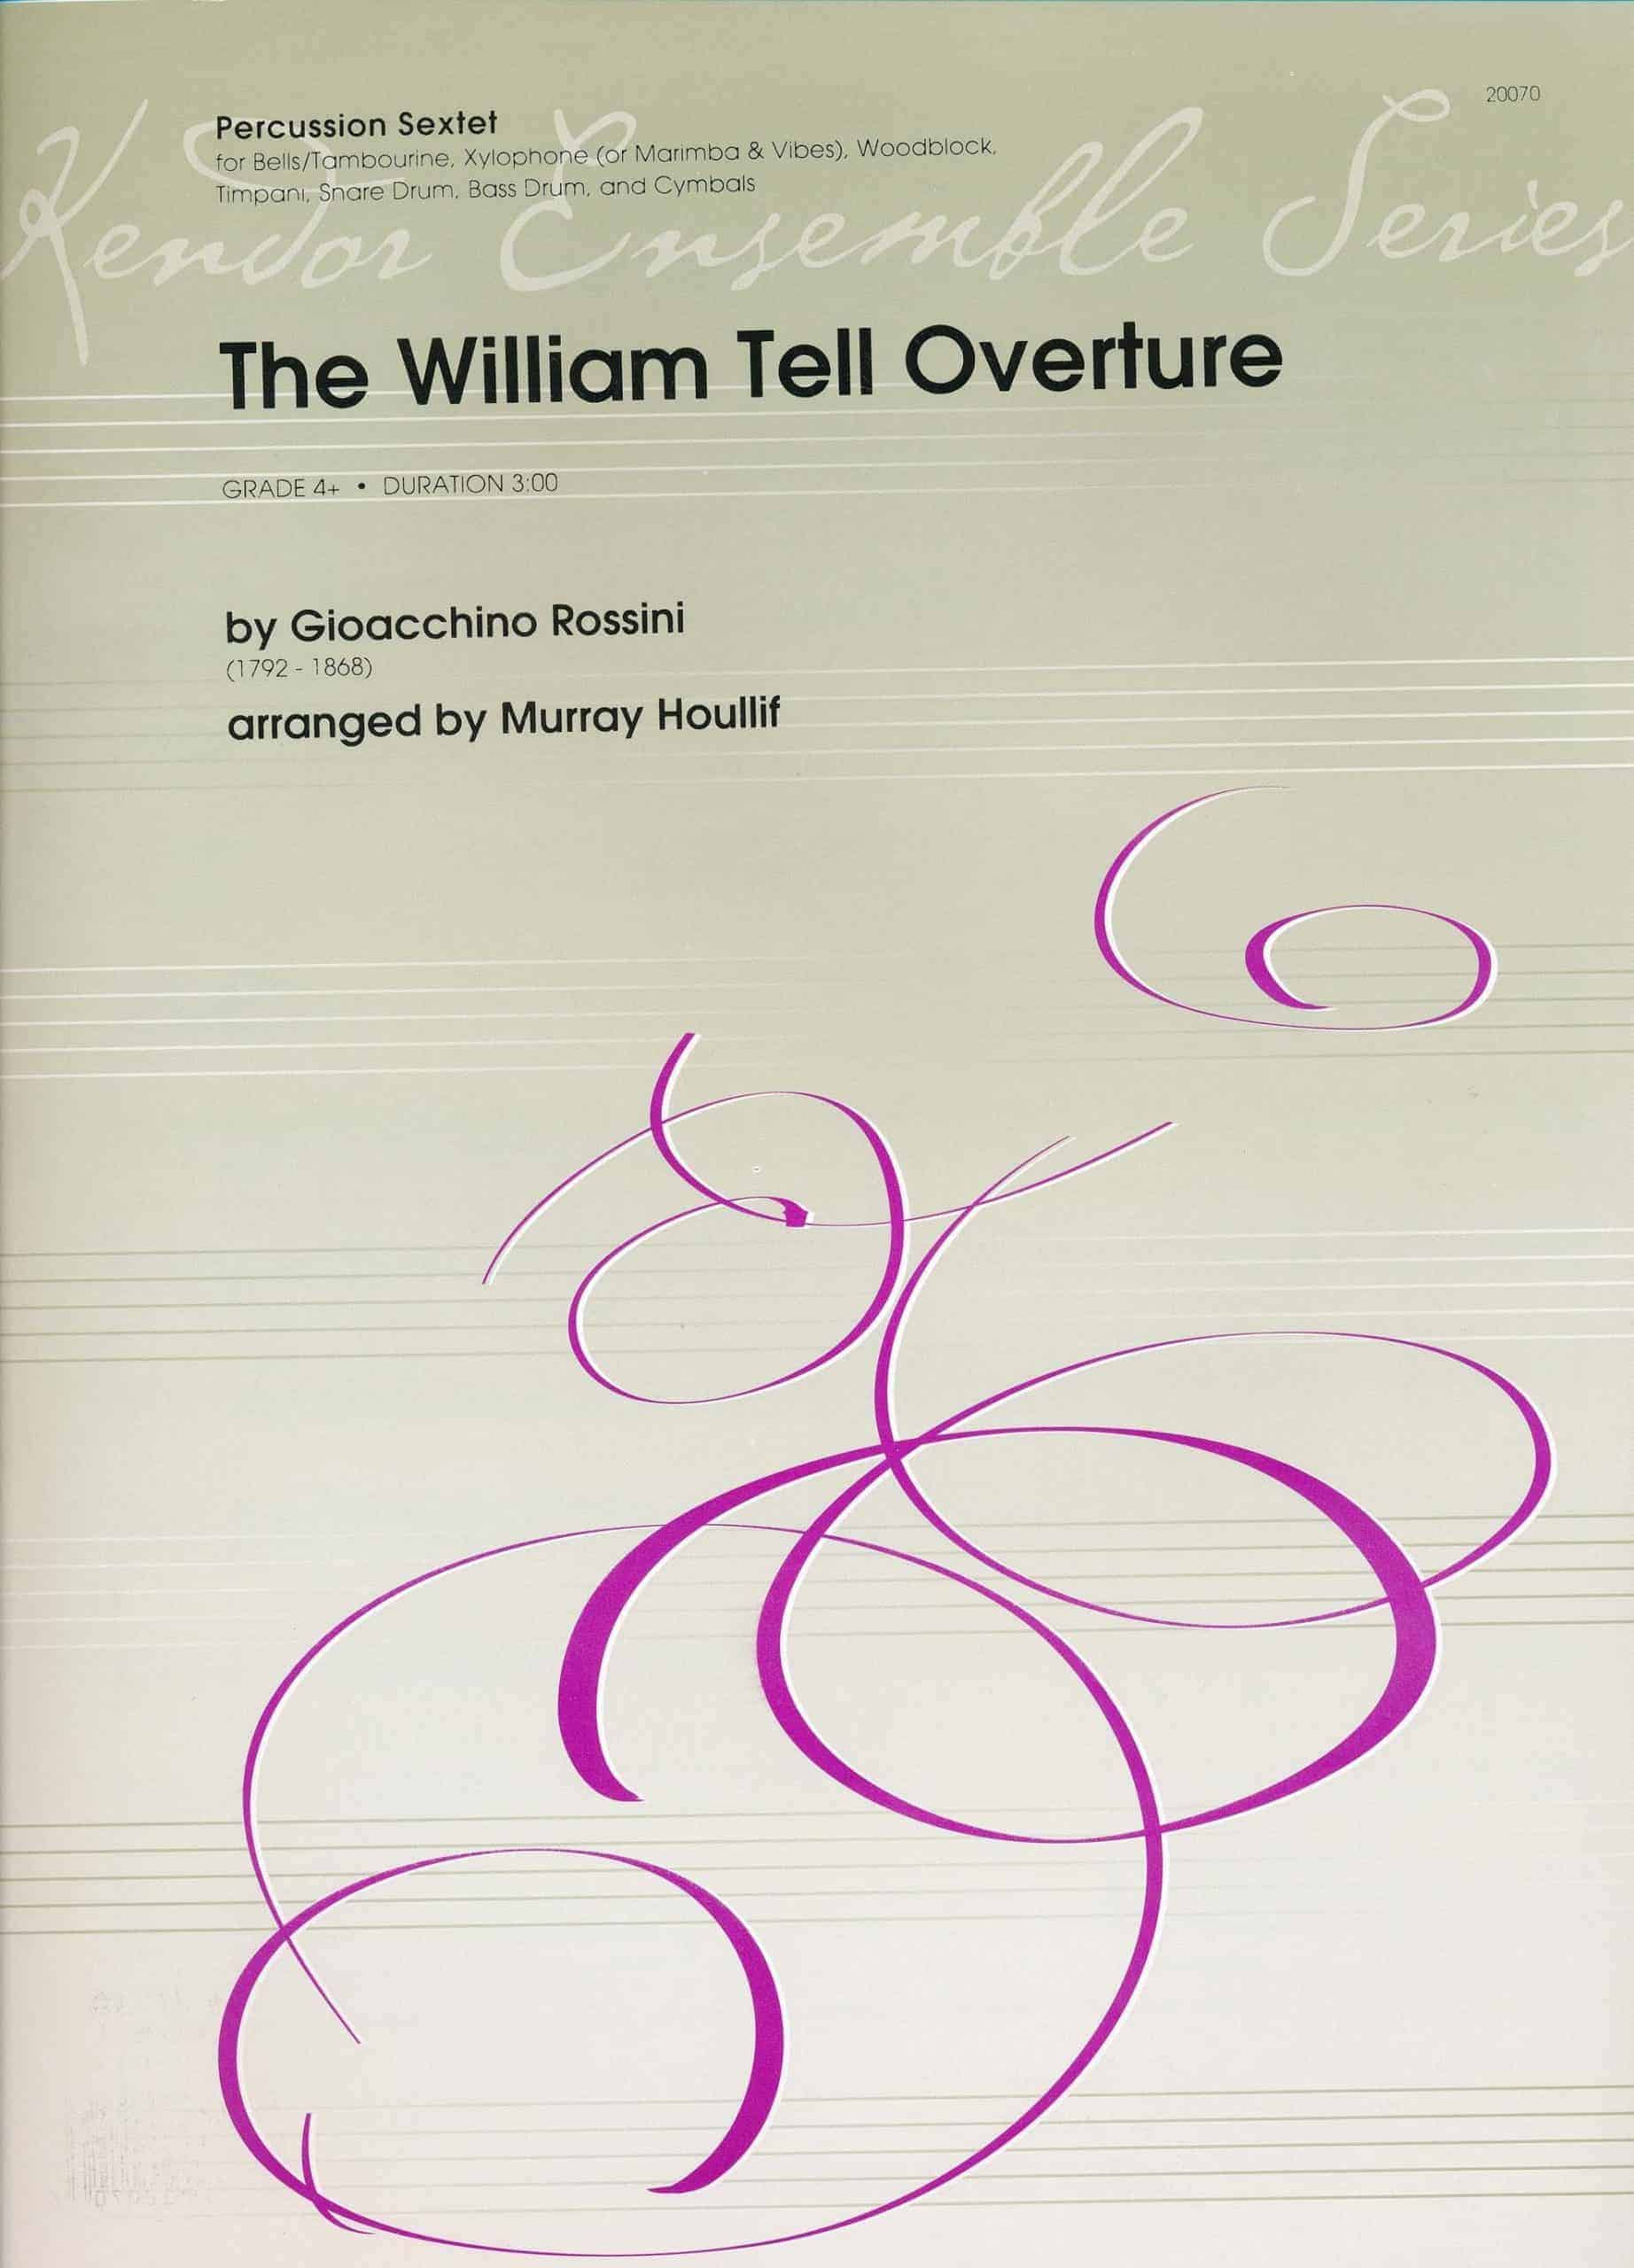 The William Tell Overture